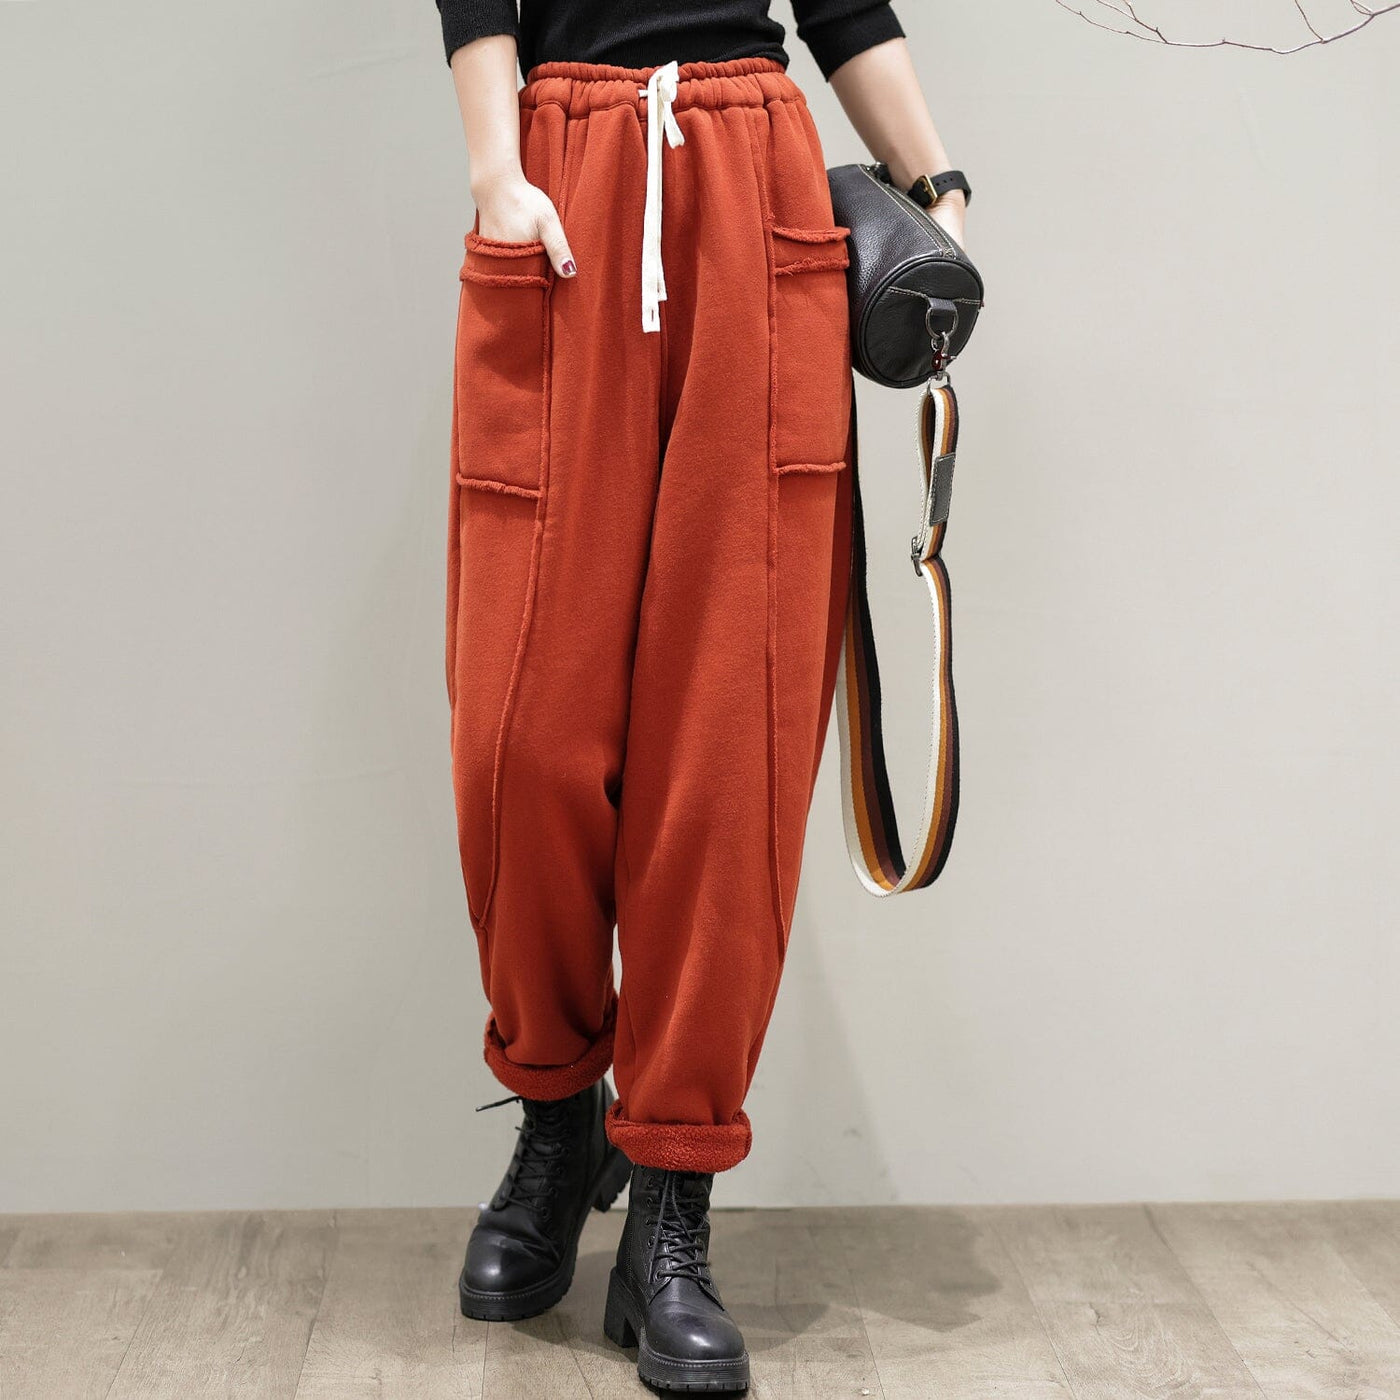 Women Casual Fleece Winter Solid Harem Pants Nov 2022 New Arrival One Size Red 